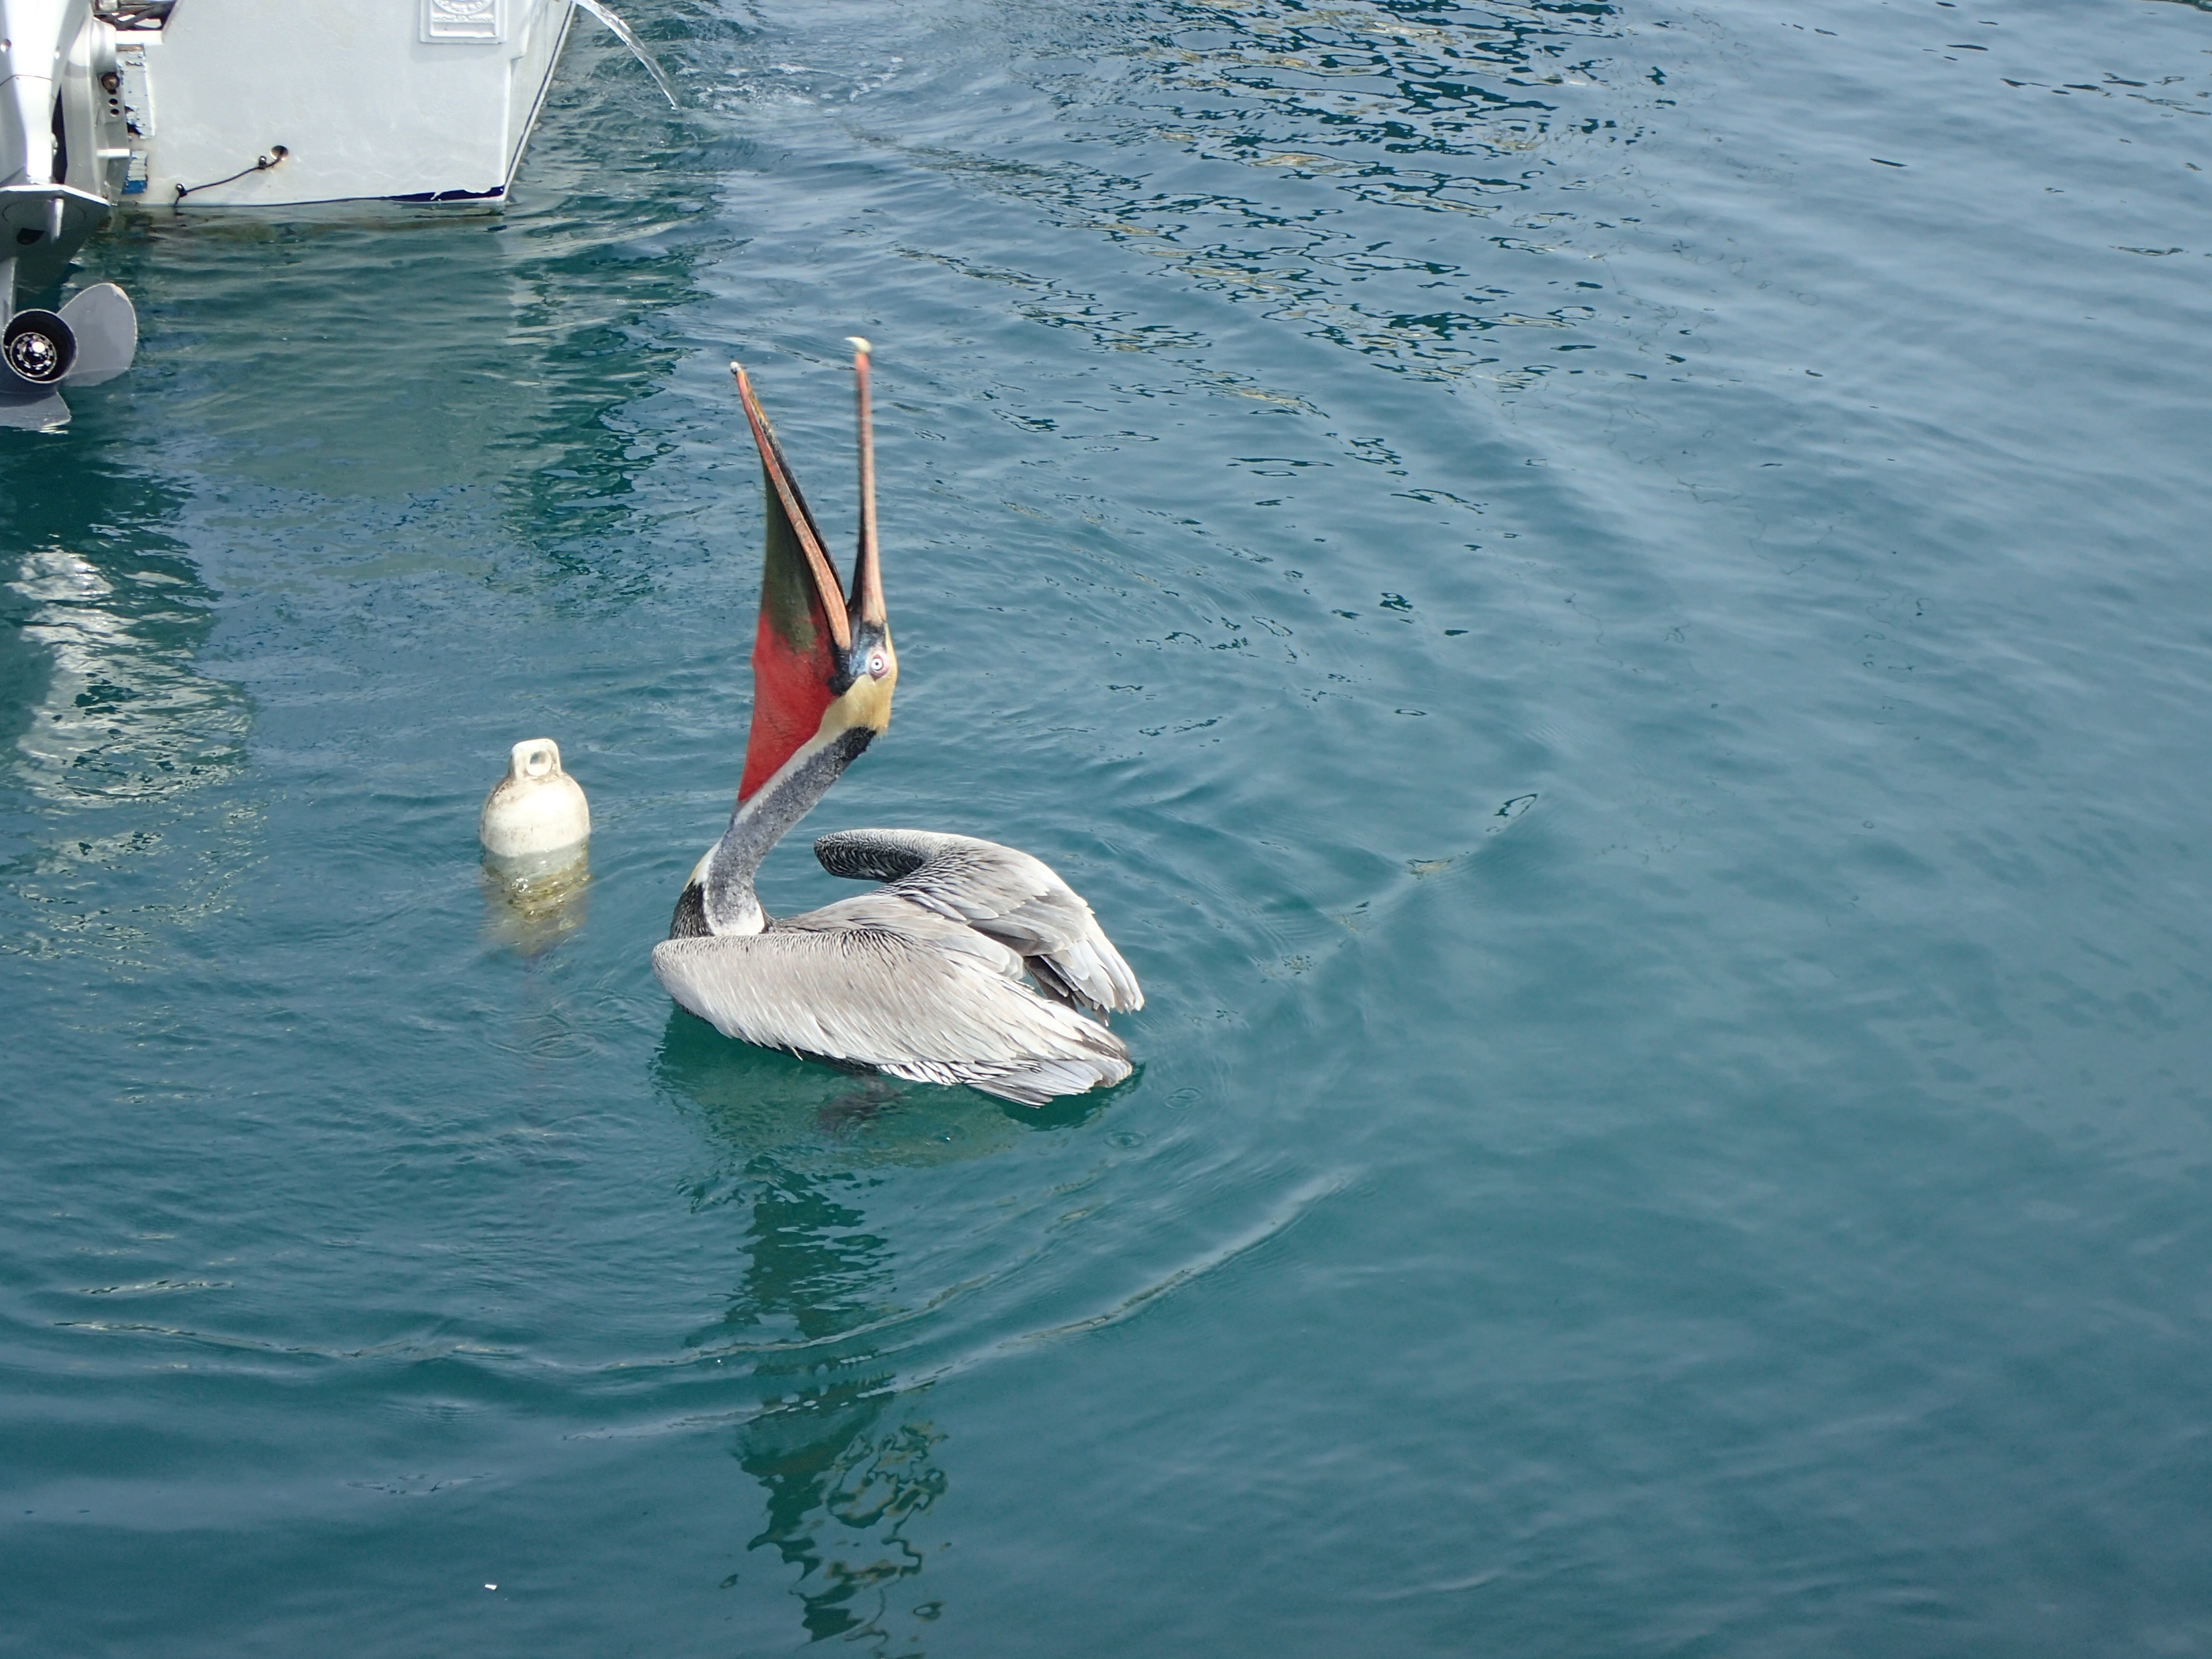 A pelican begging for food from a fisherman at Cabo San Lucas.